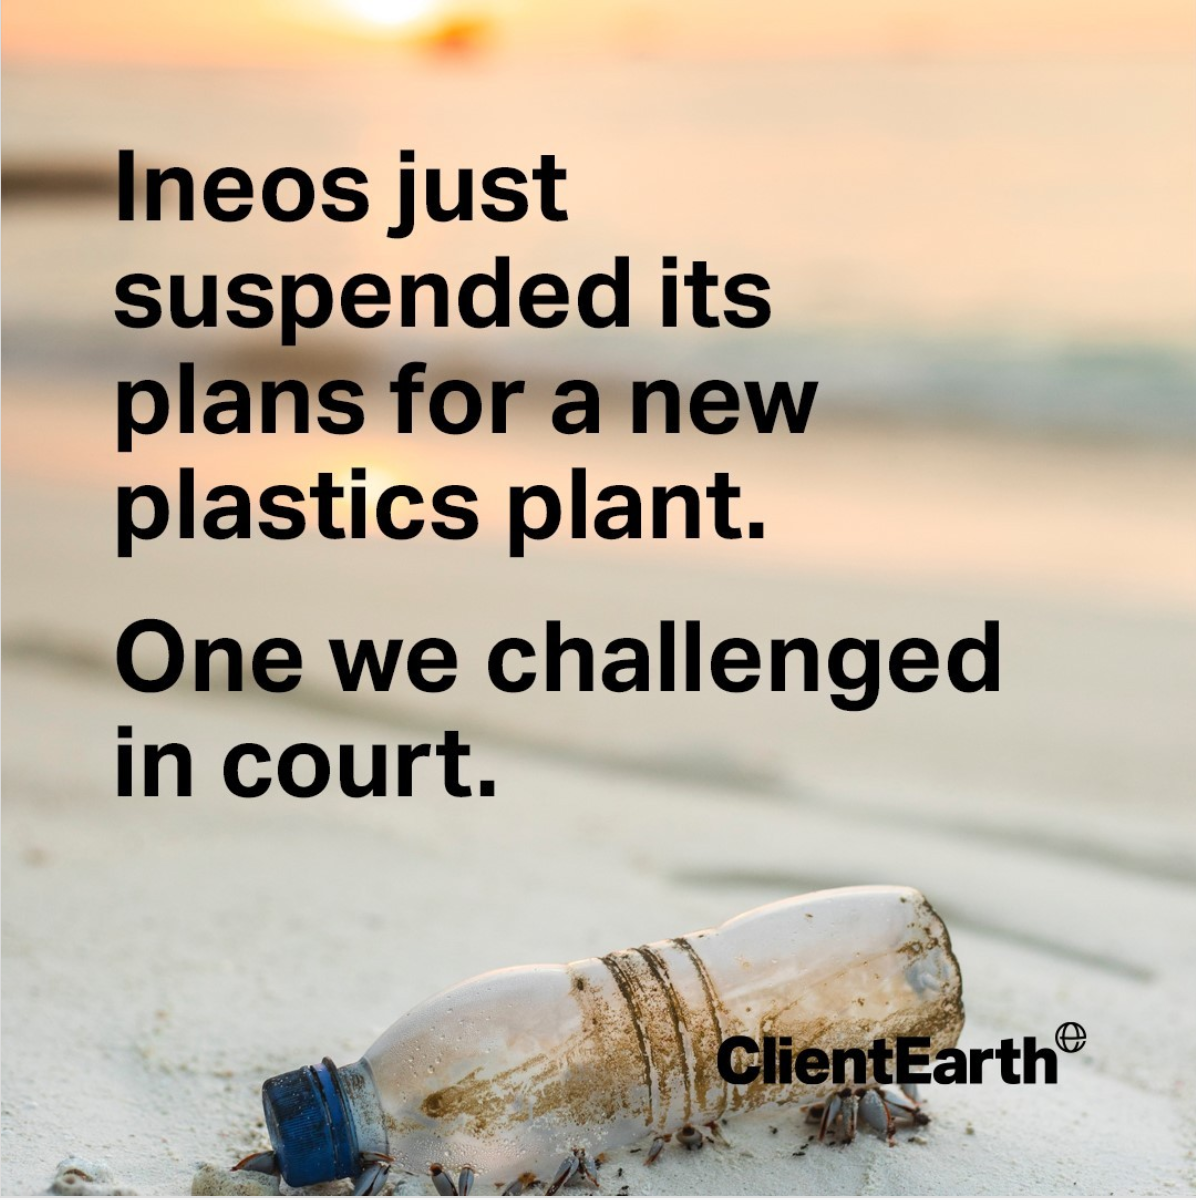 Ineos just suspended its plans for a new plastics plant!